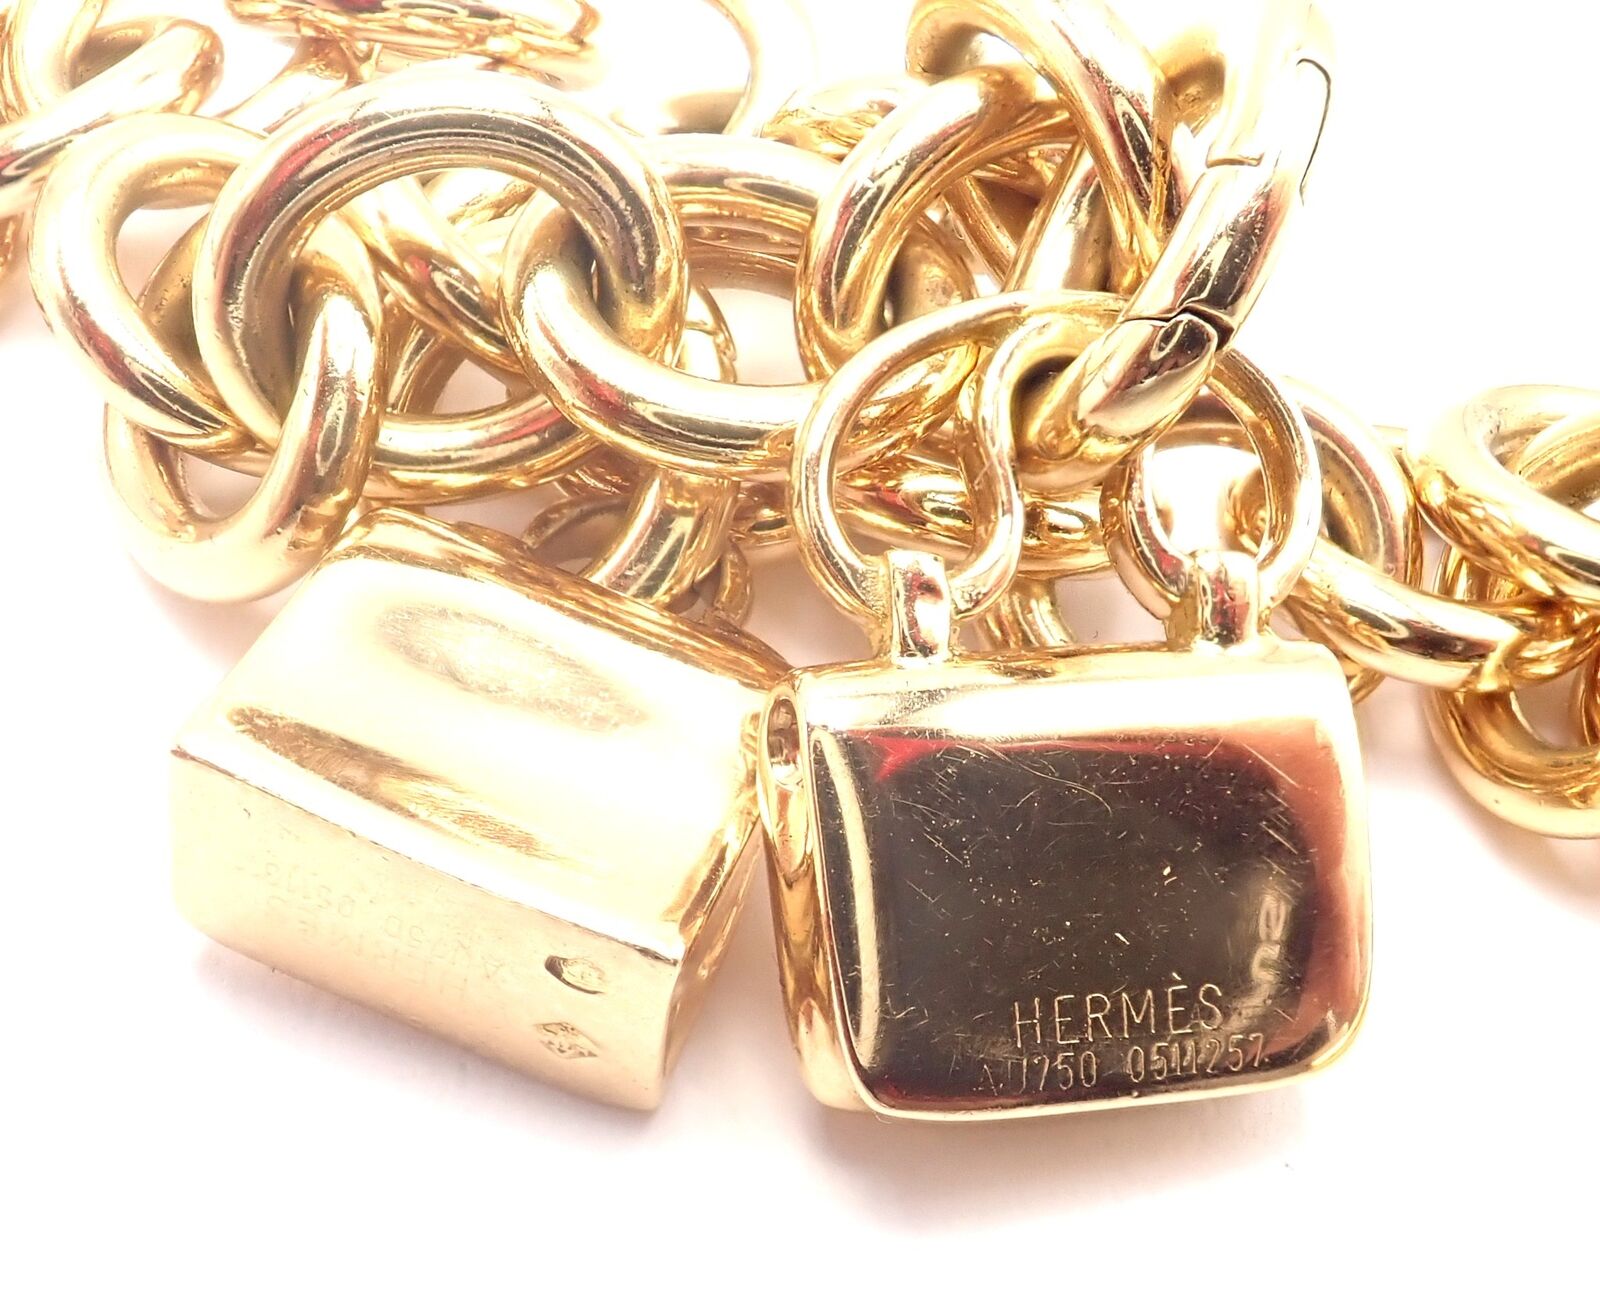 Hermes Jewelry & Watches:Fine Jewelry:Bracelets & Charms Authentic! Hermes 18k Yellow Gold Heavy Link Toggle With Two Charms Bracelet